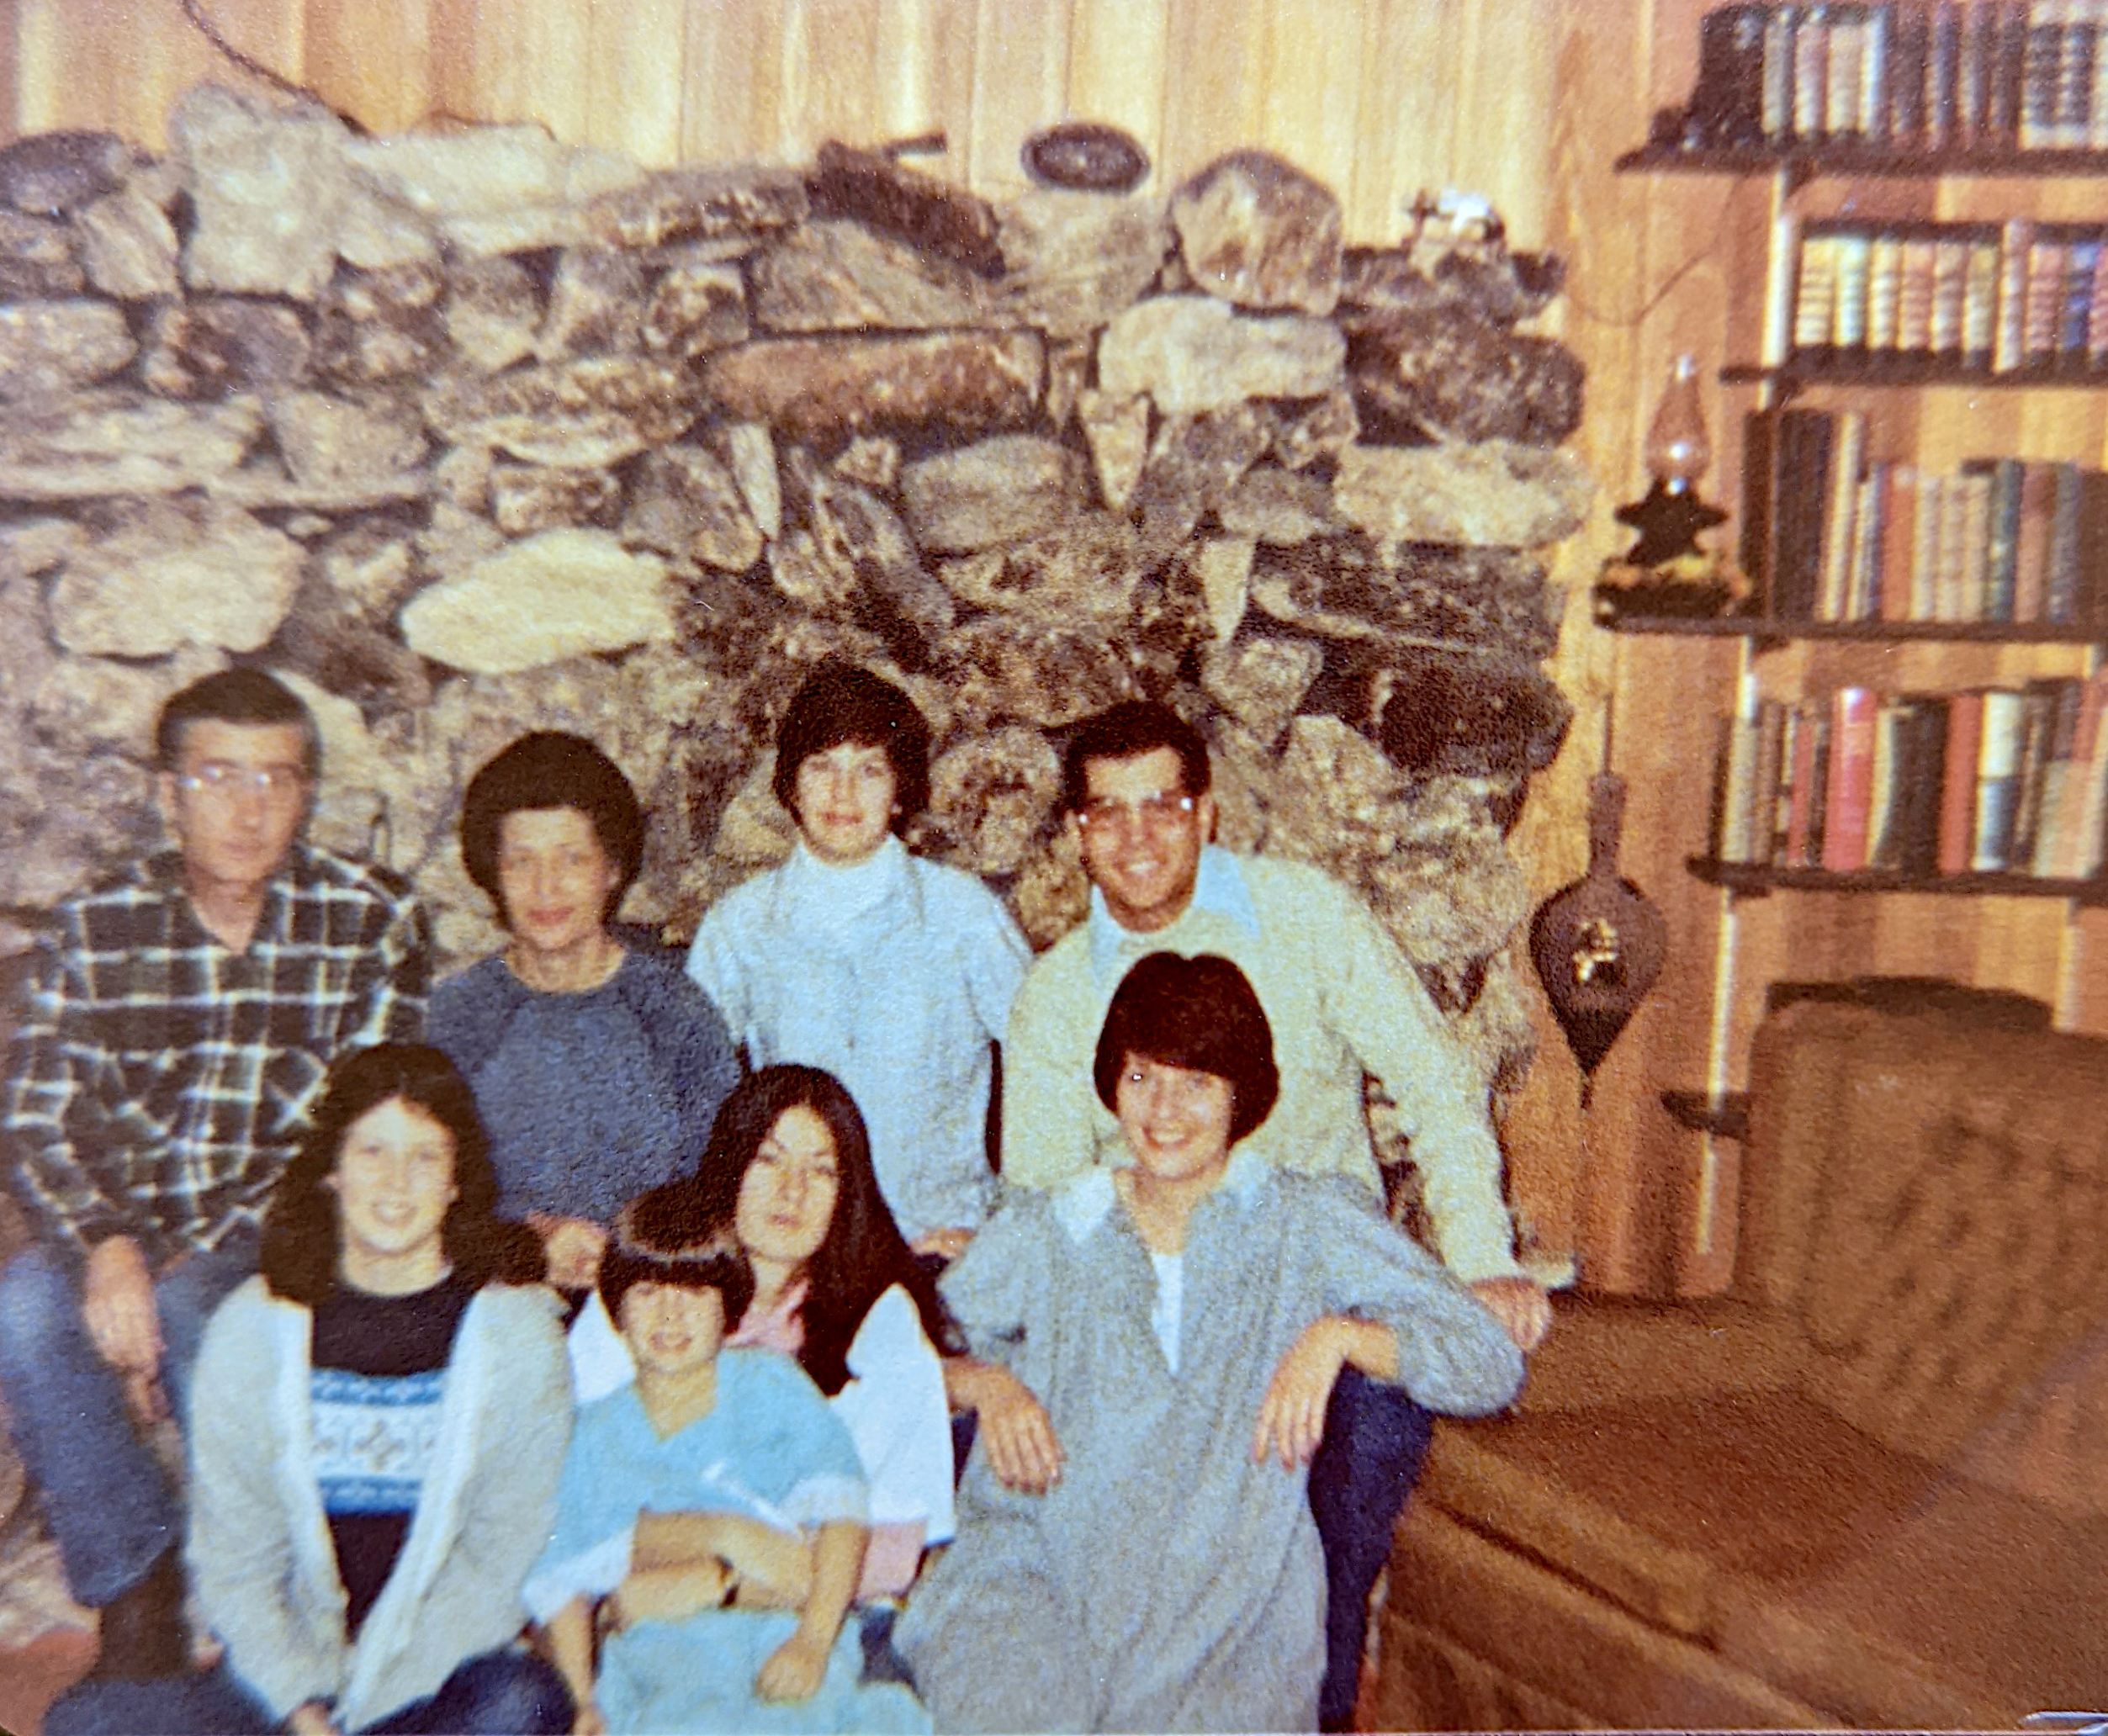 James Bartlett with family by Alpena fireplace